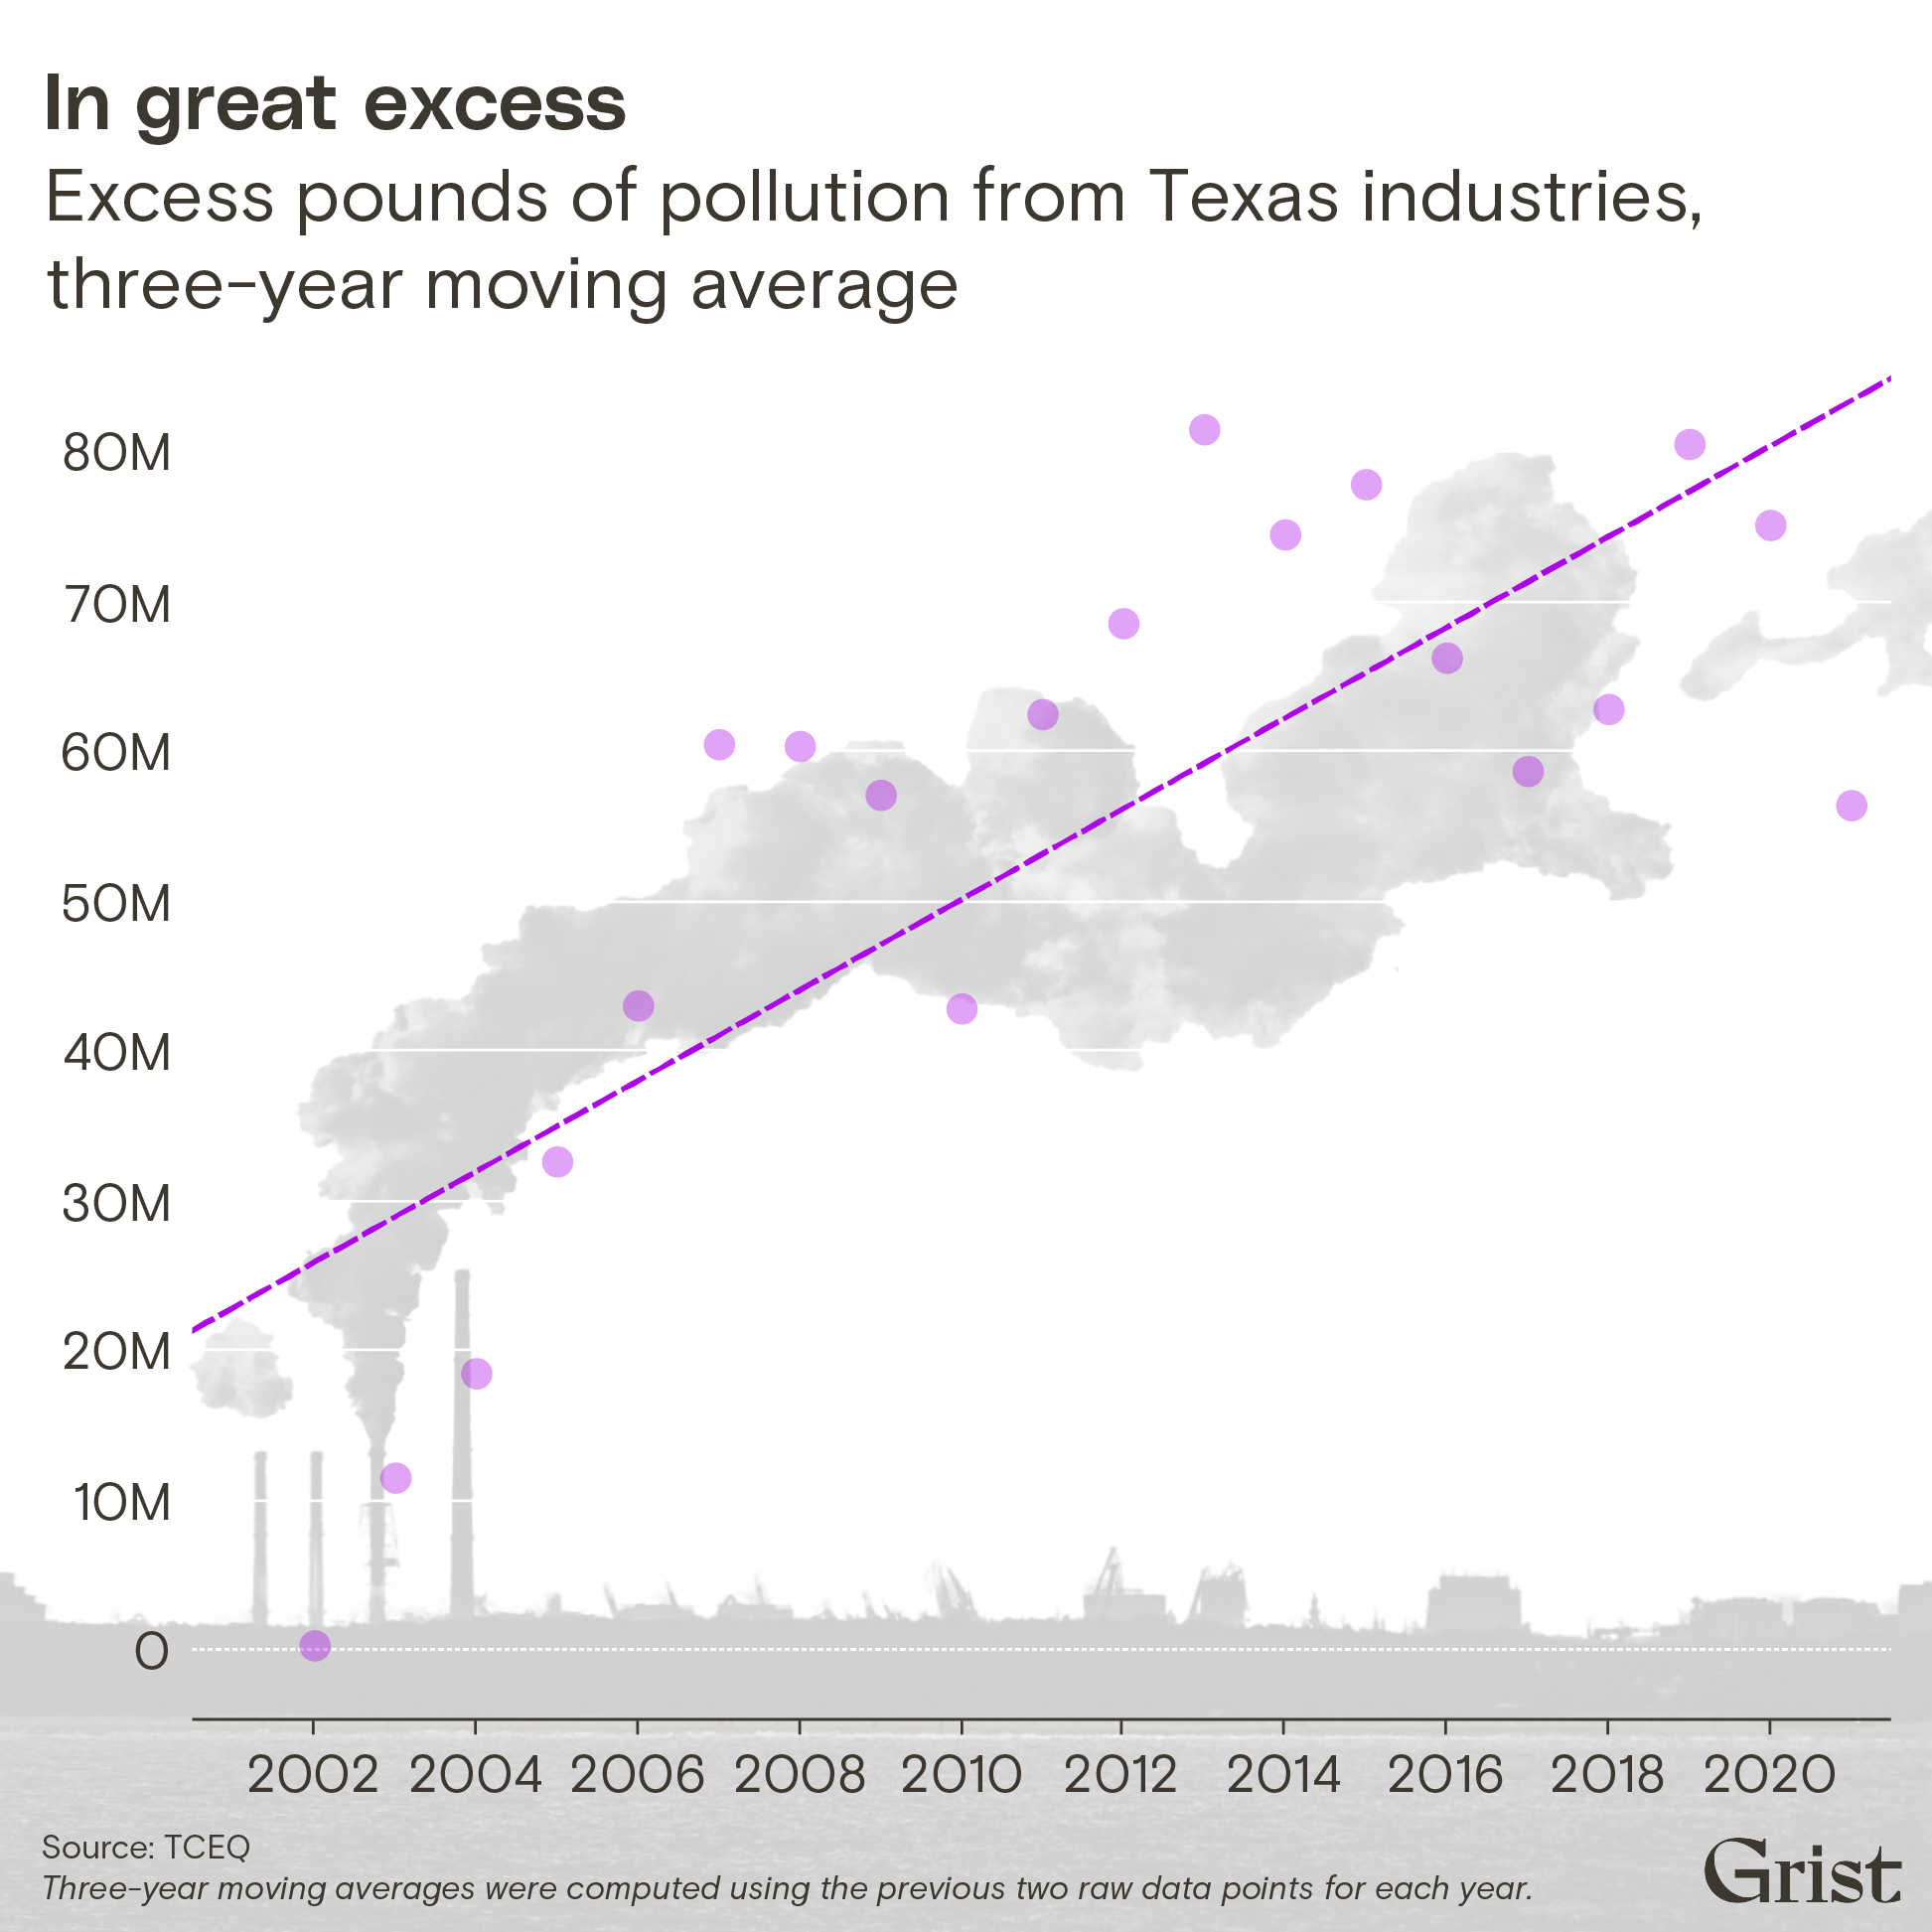 A scatterplot and best-fit line showing excess pounds of pollution from Texas industries between 2002 and 2021. The three-year moving average of excess emissions increased by approximately 75% between 2006 and 2021.